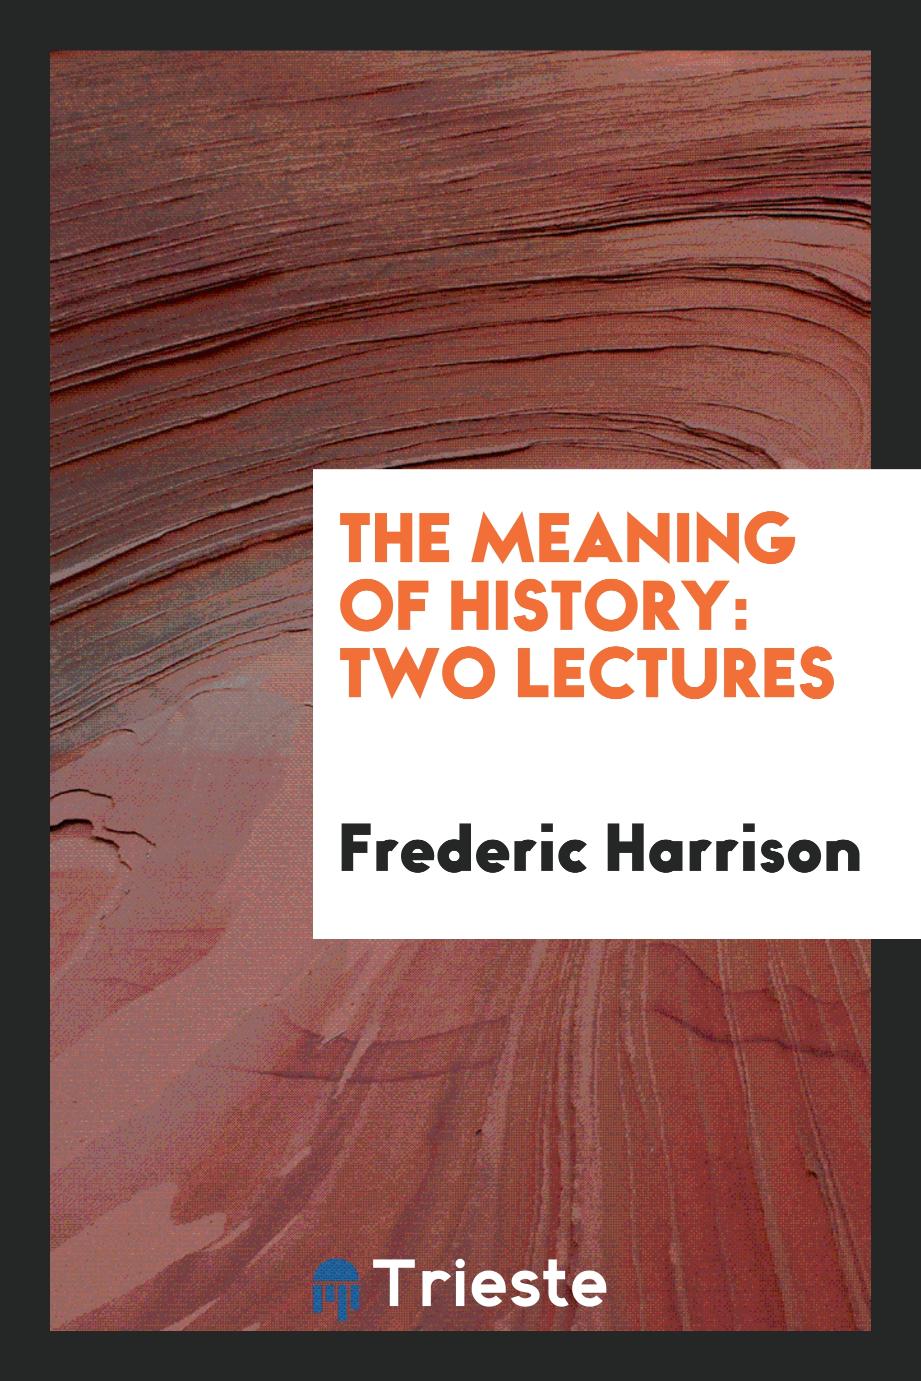 The Meaning of History: Two Lectures